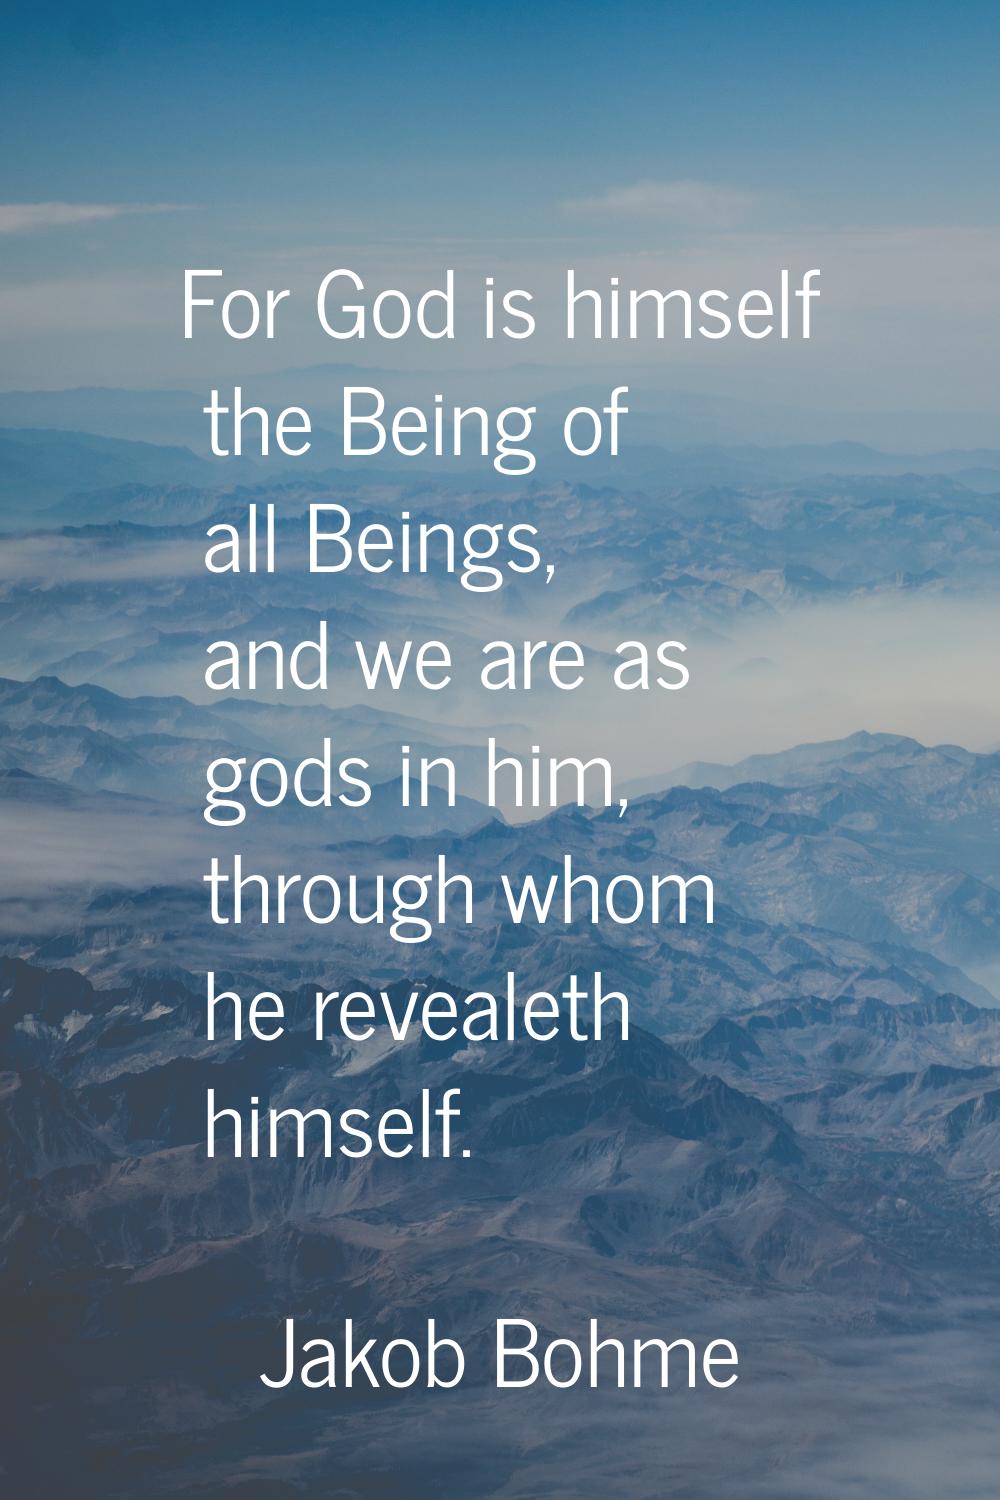 For God is himself the Being of all Beings, and we are as gods in him, through whom he revealeth hi